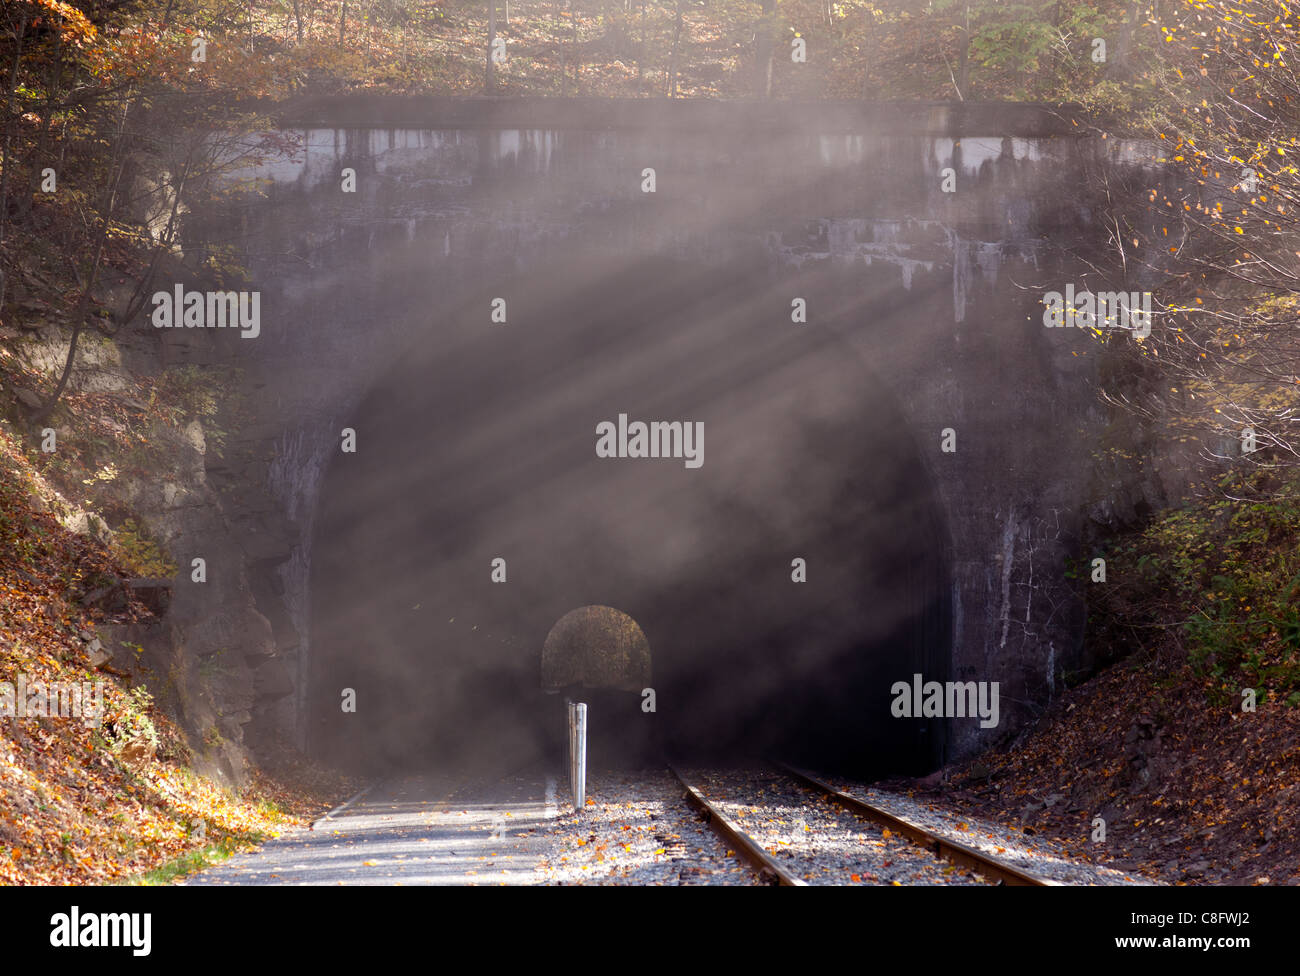 Old steam train leaves smoke and steam after it leaves tunnel Stock Photo